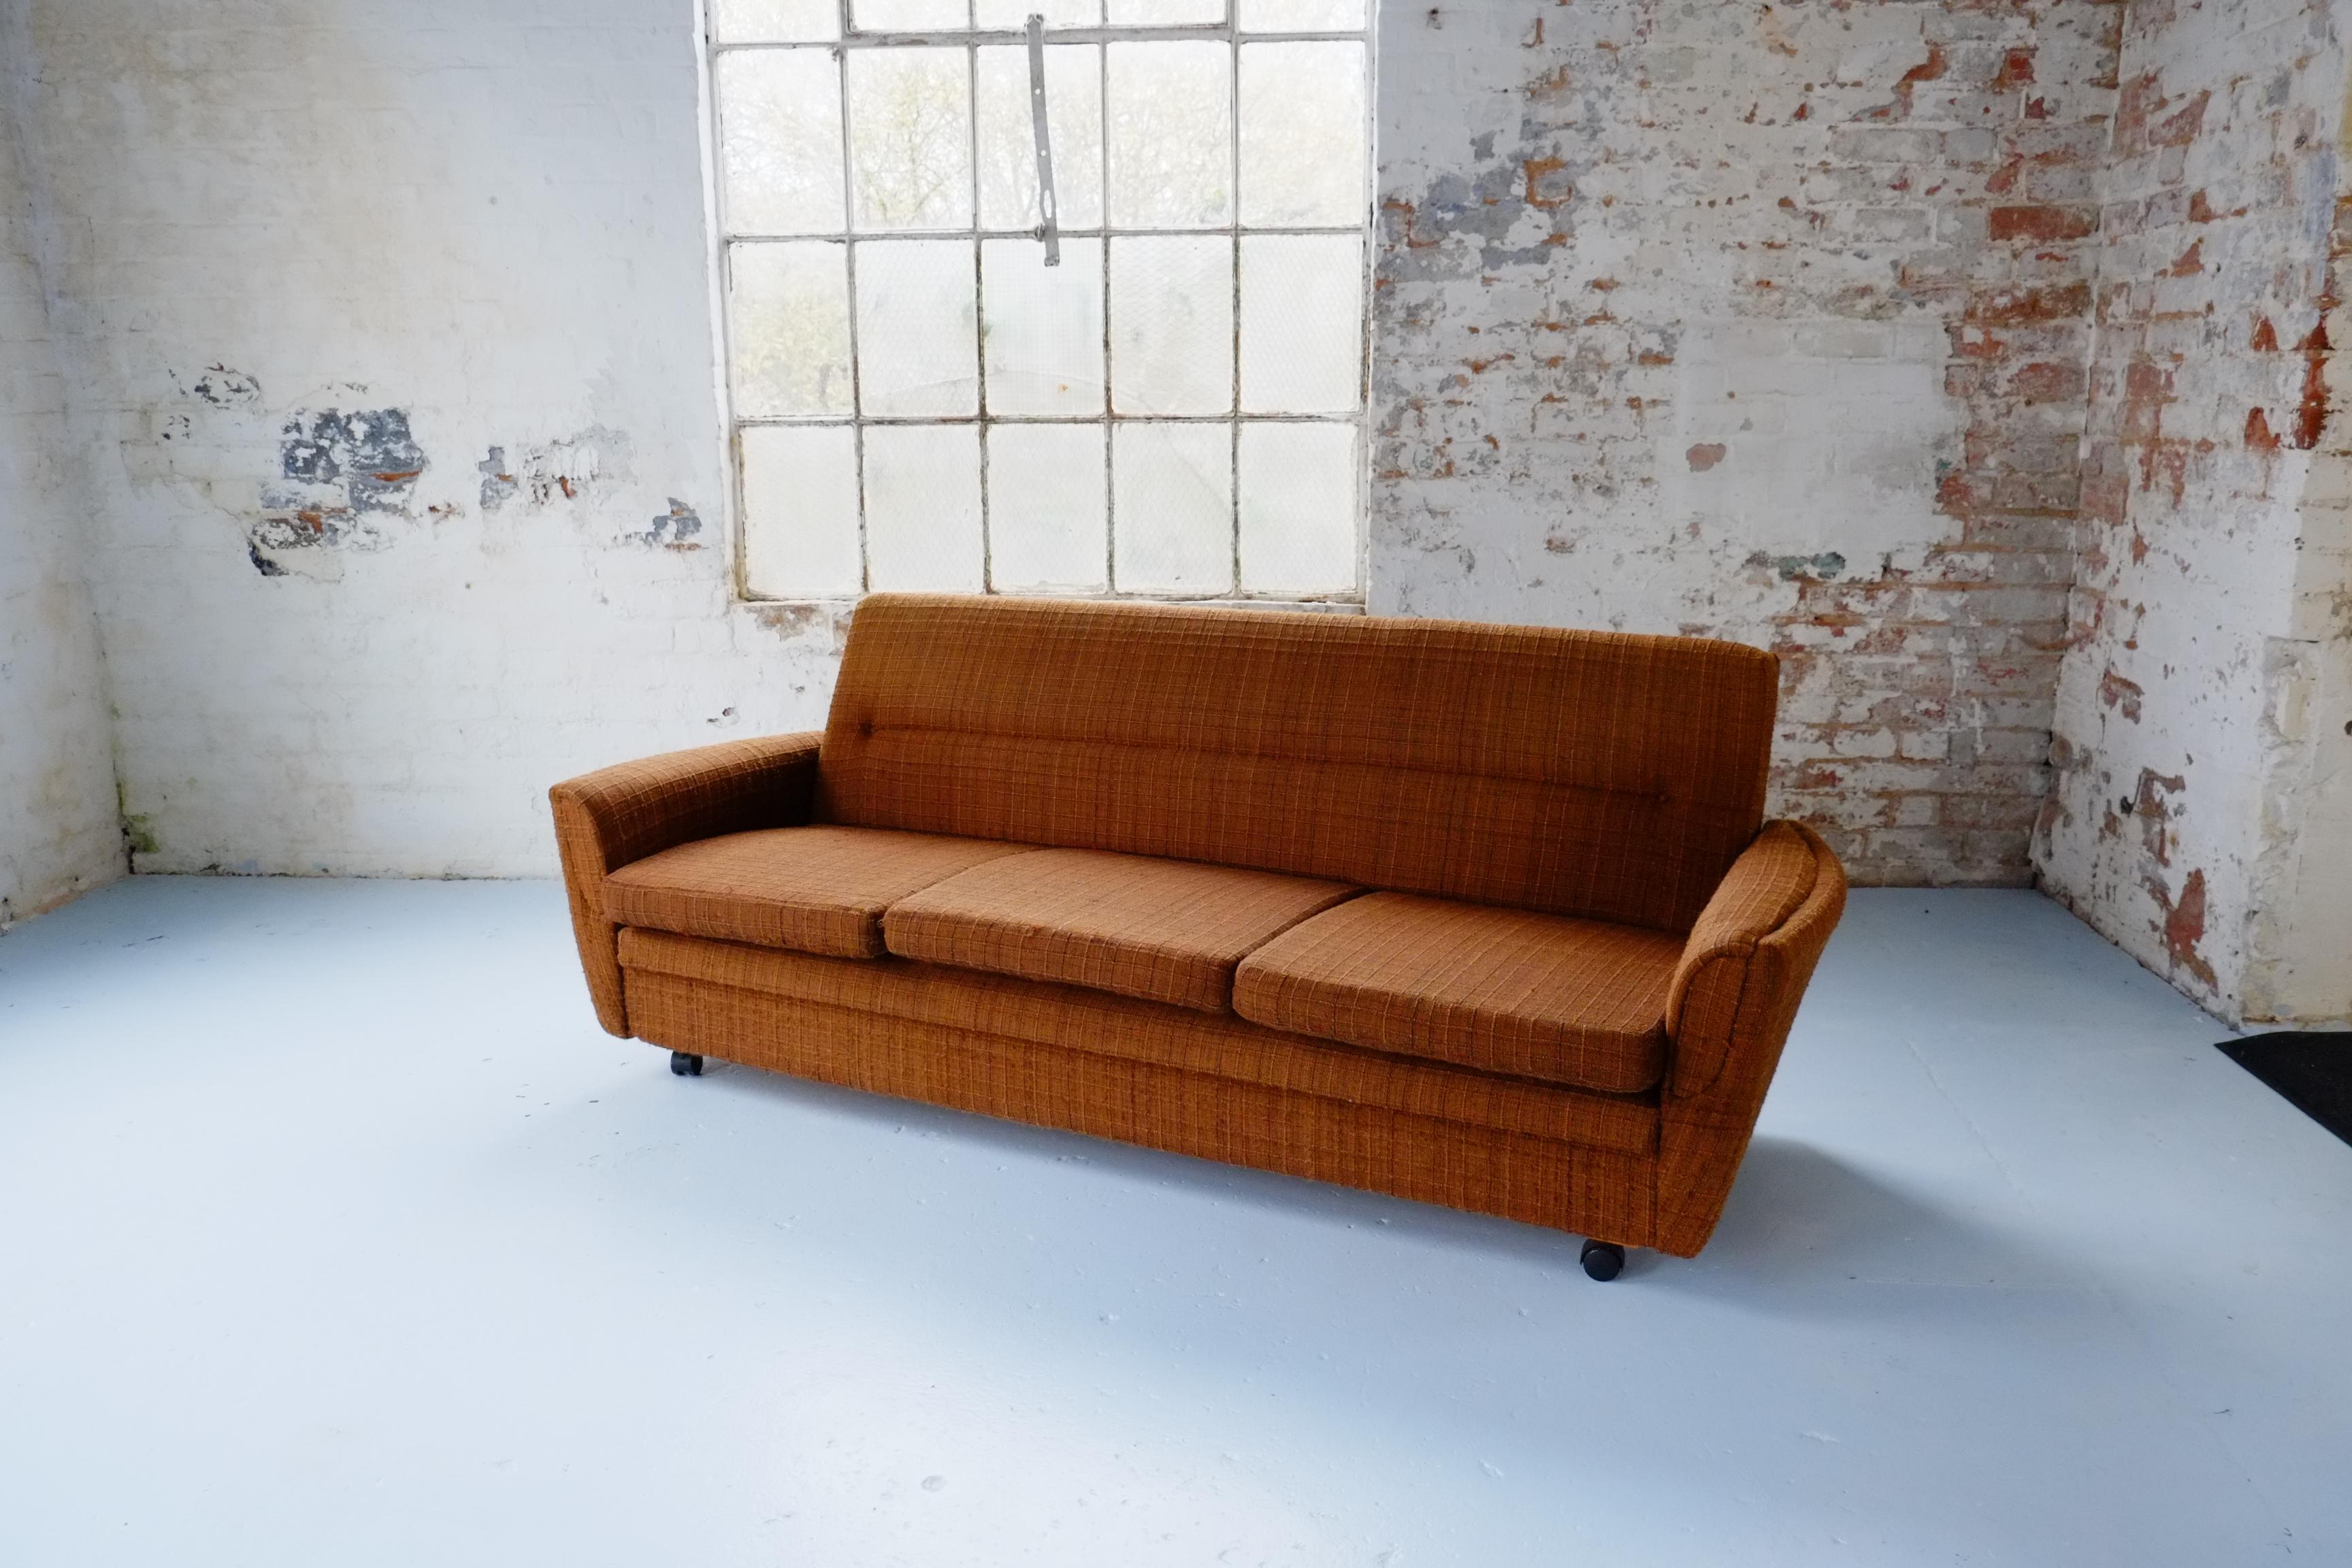 A rare find - an original 1970s brown fabric settee, that transforms into a small double bed for occasional guests. The sofa has lovely curved armrests and elegant proportions. The fabric is original, clean, and has a bobbly '70s signature texture